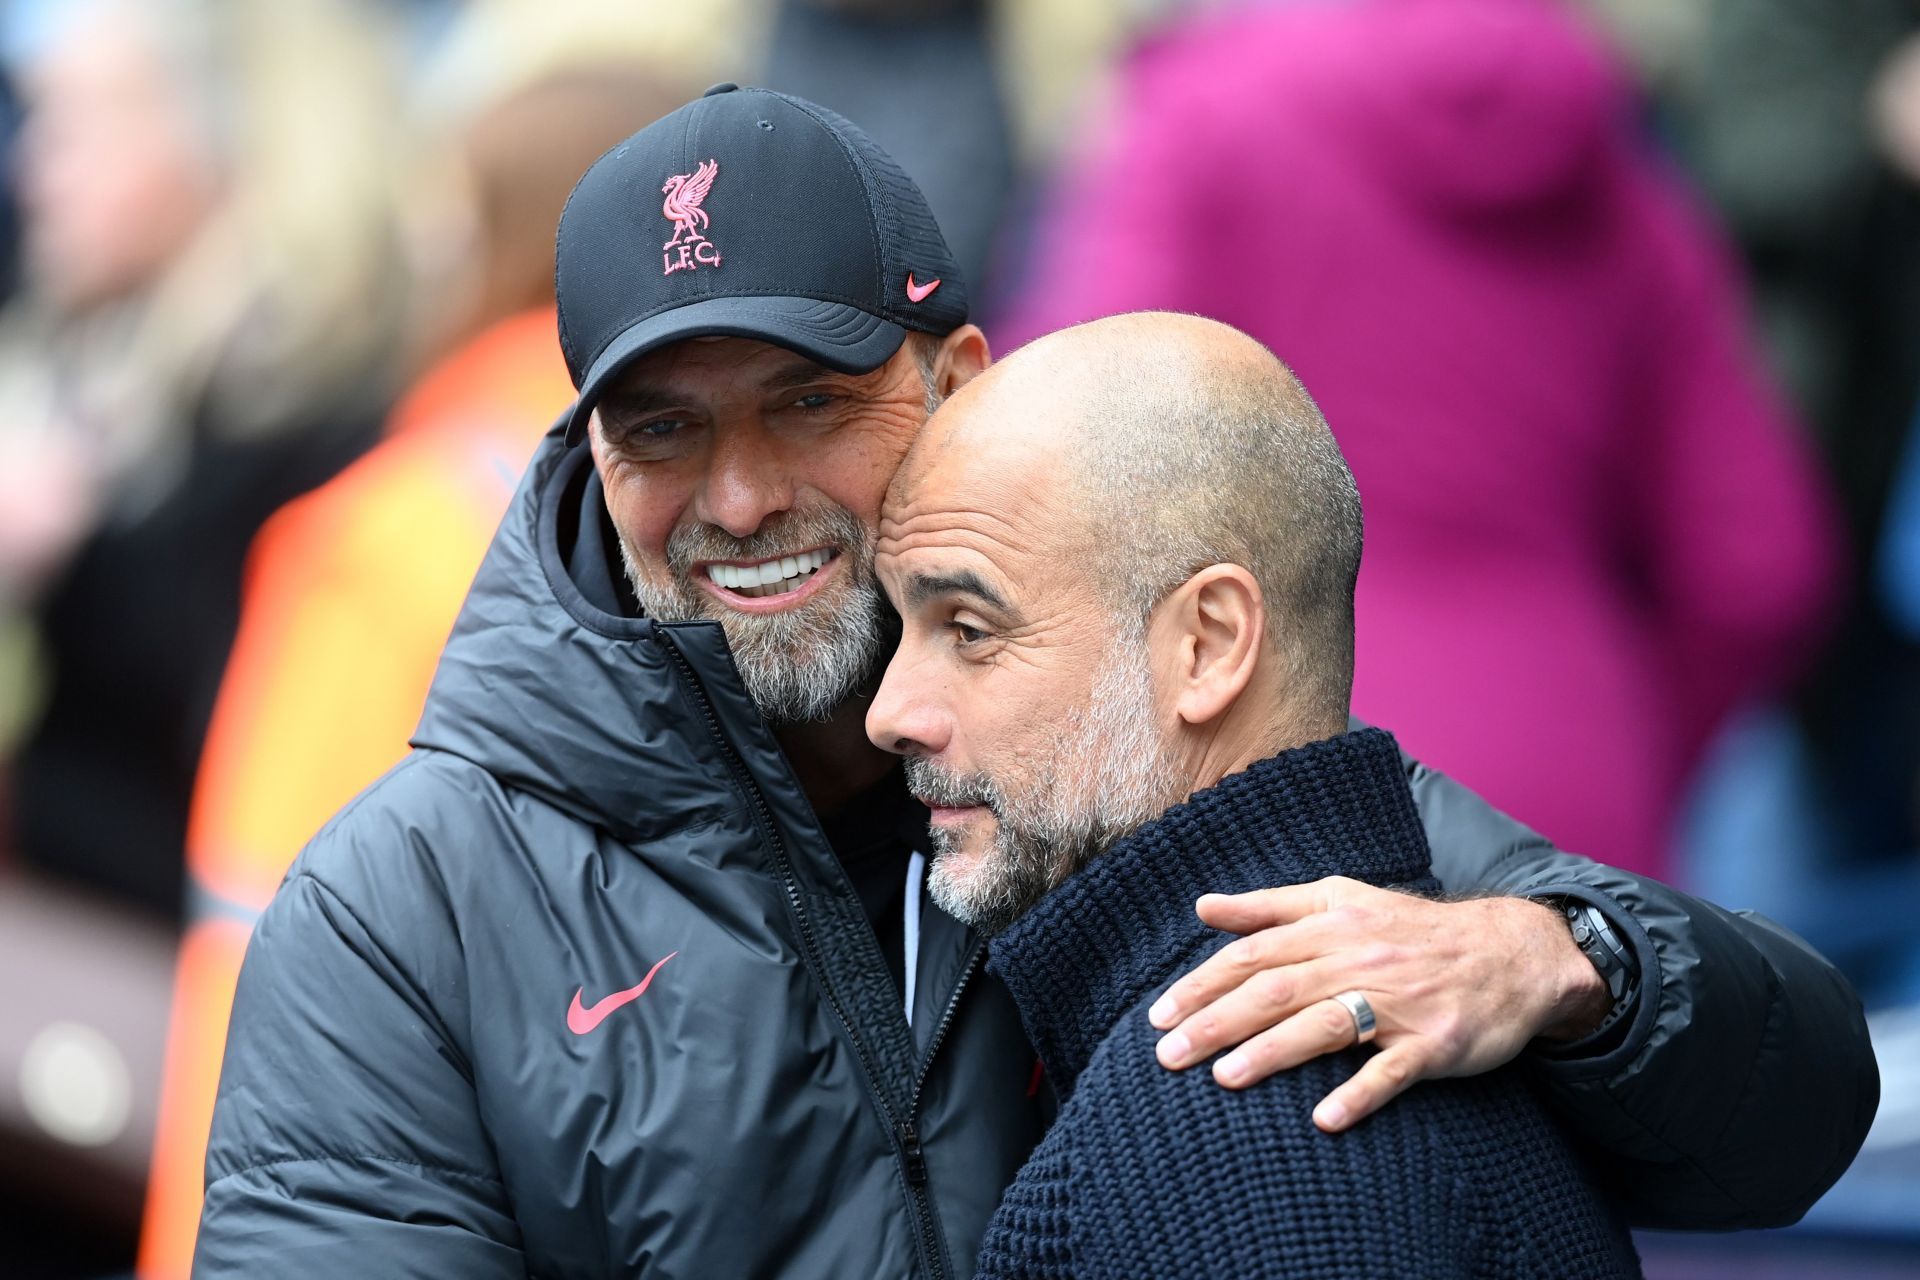 Jurgen Klopp and Pep Guardiola hold massive respect for one another.